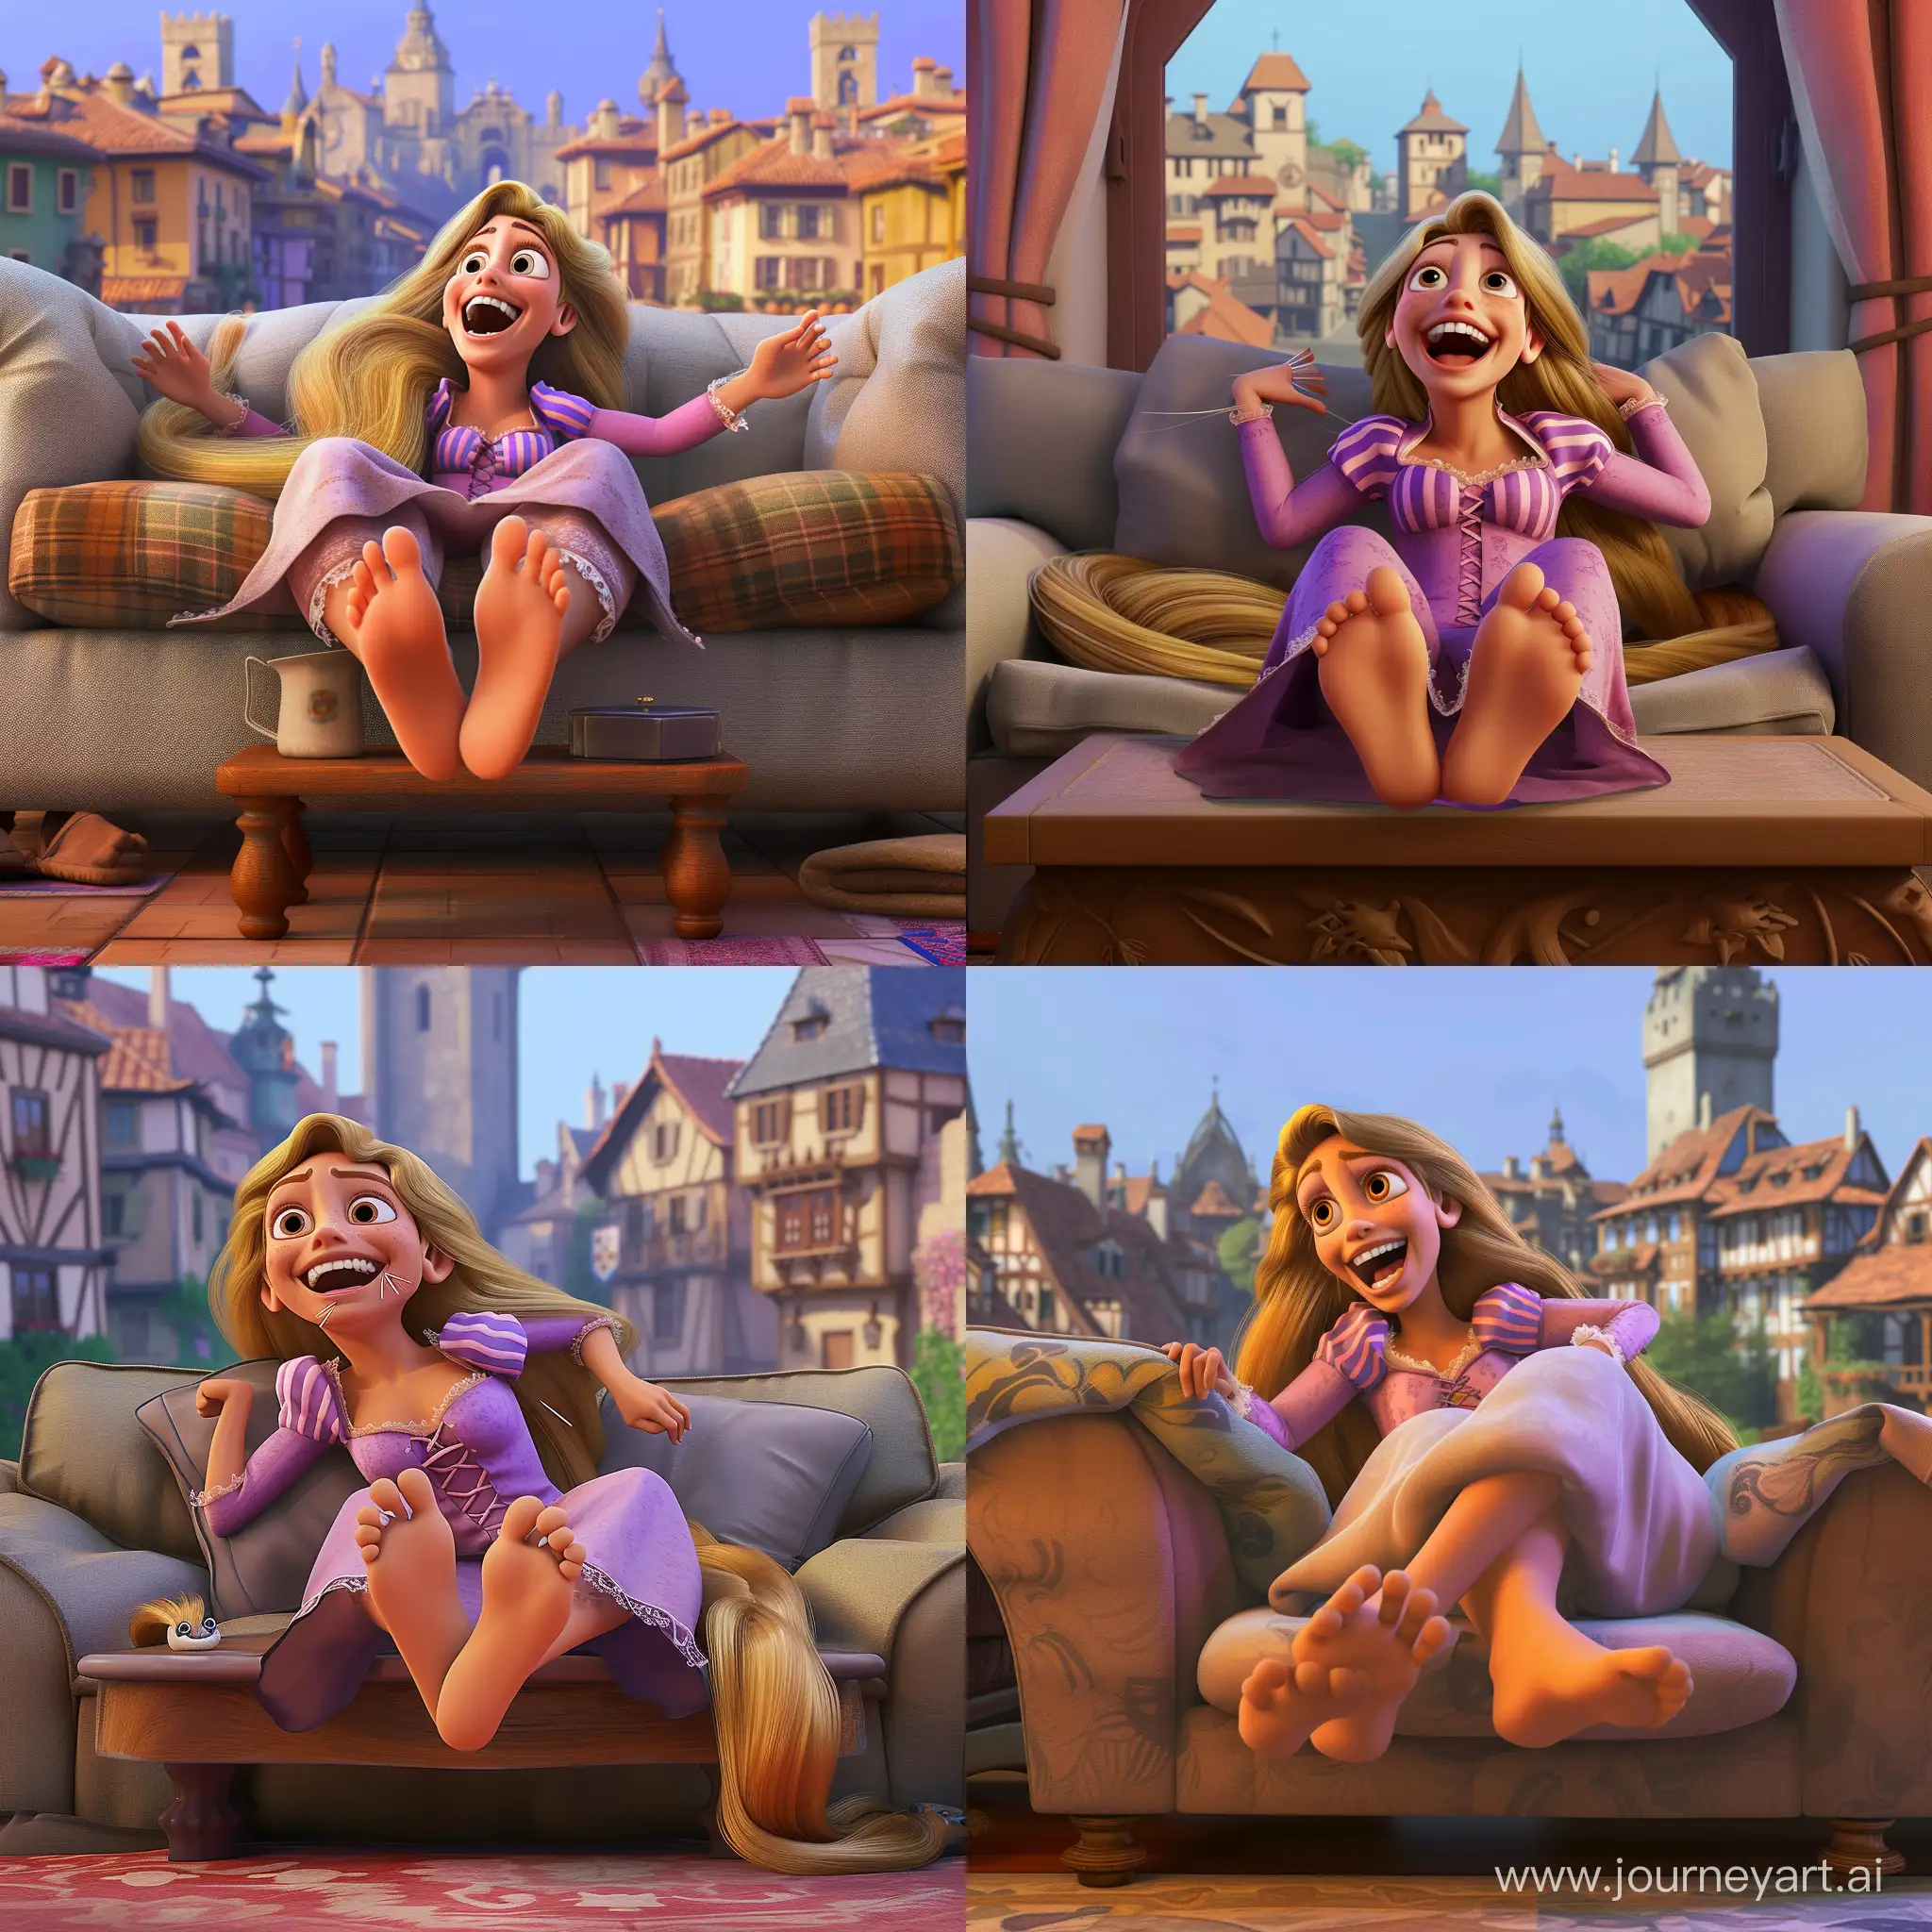 Rapunzel-Laughing-Joyfully-on-Couch-in-Medieval-Town-Setting